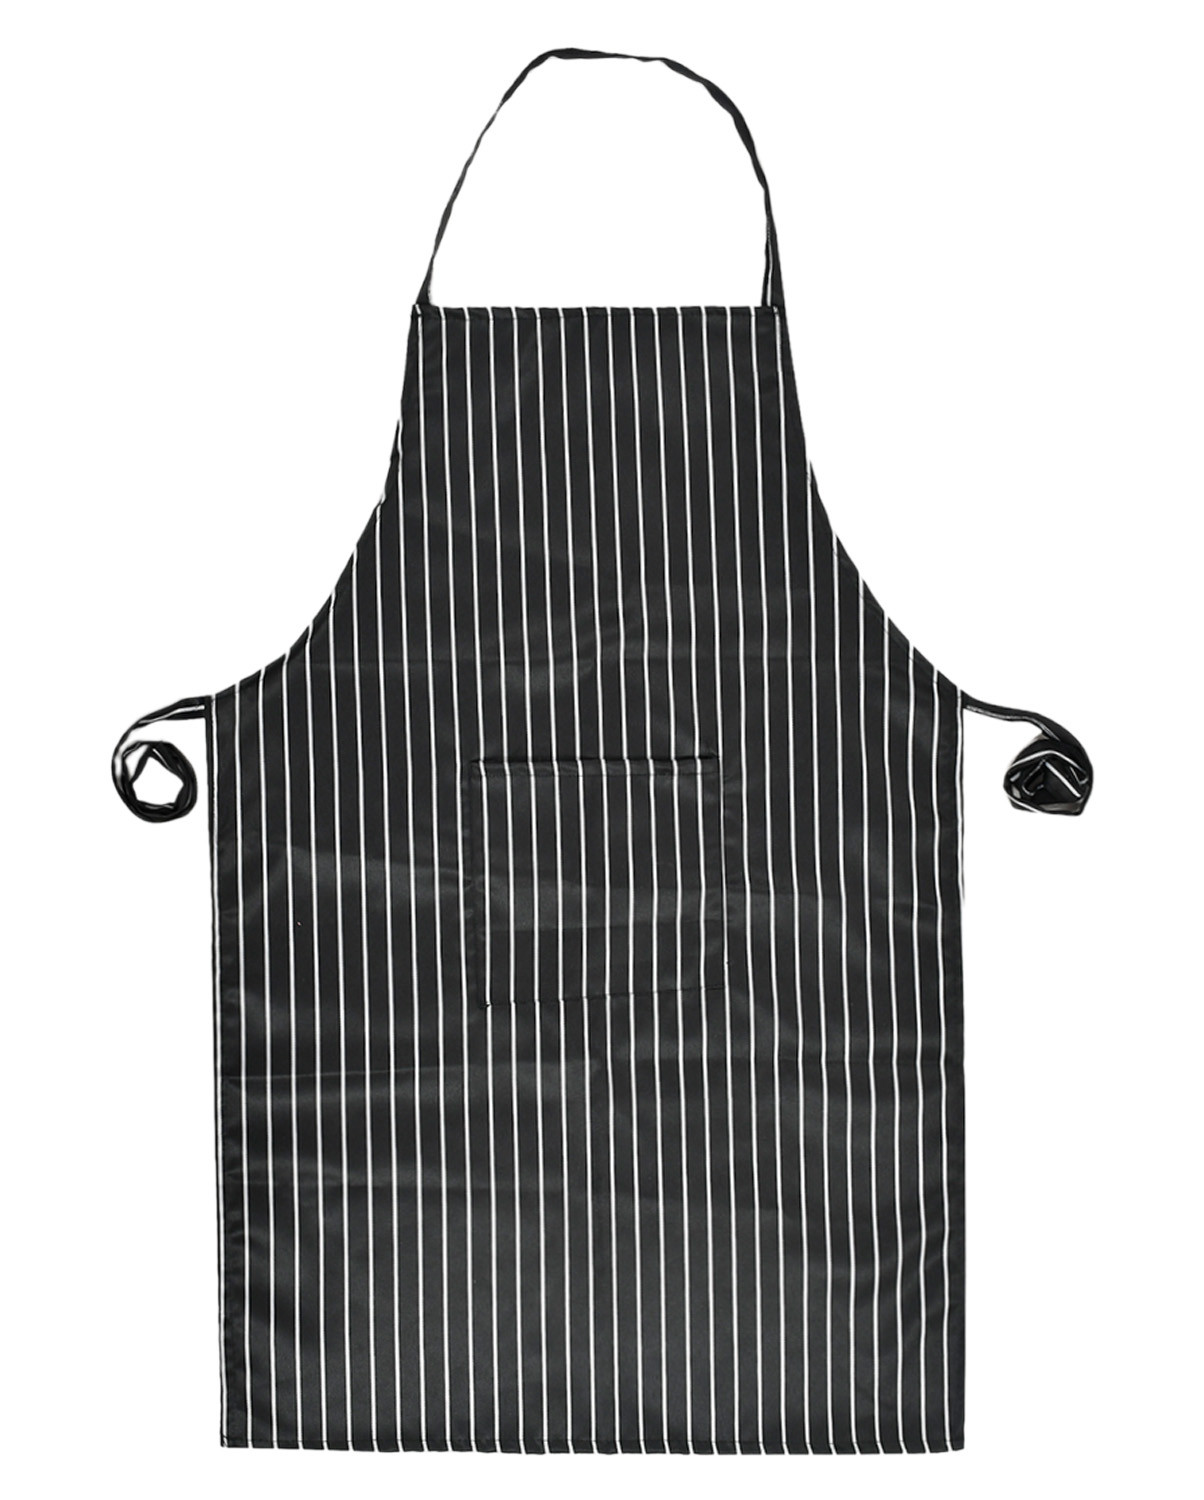 Kuber Industries Linning Printed Apron & Cooking Cap Set For Cooking, Baking, Party Favors, Home Kitchen, Restaurant,(Black)